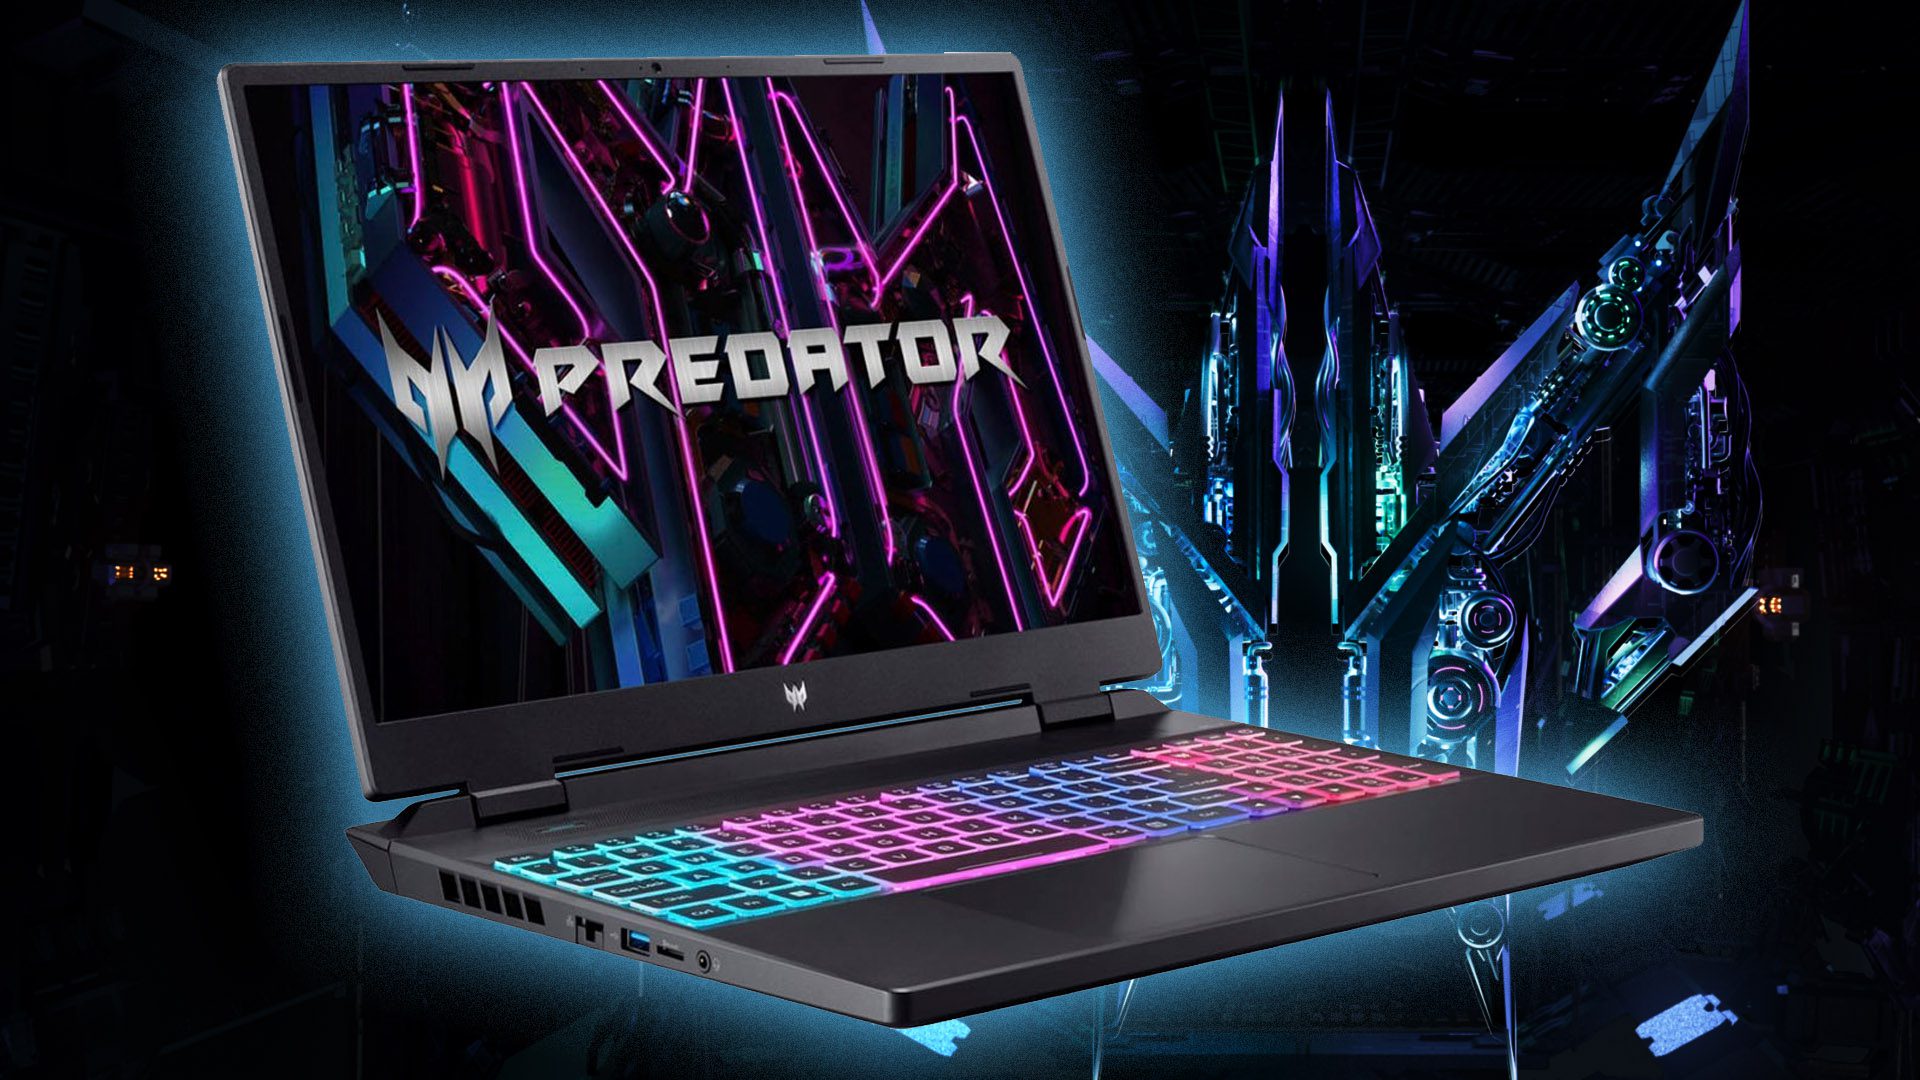 Score this RTX-powered Acer Predator gaming laptop for $800